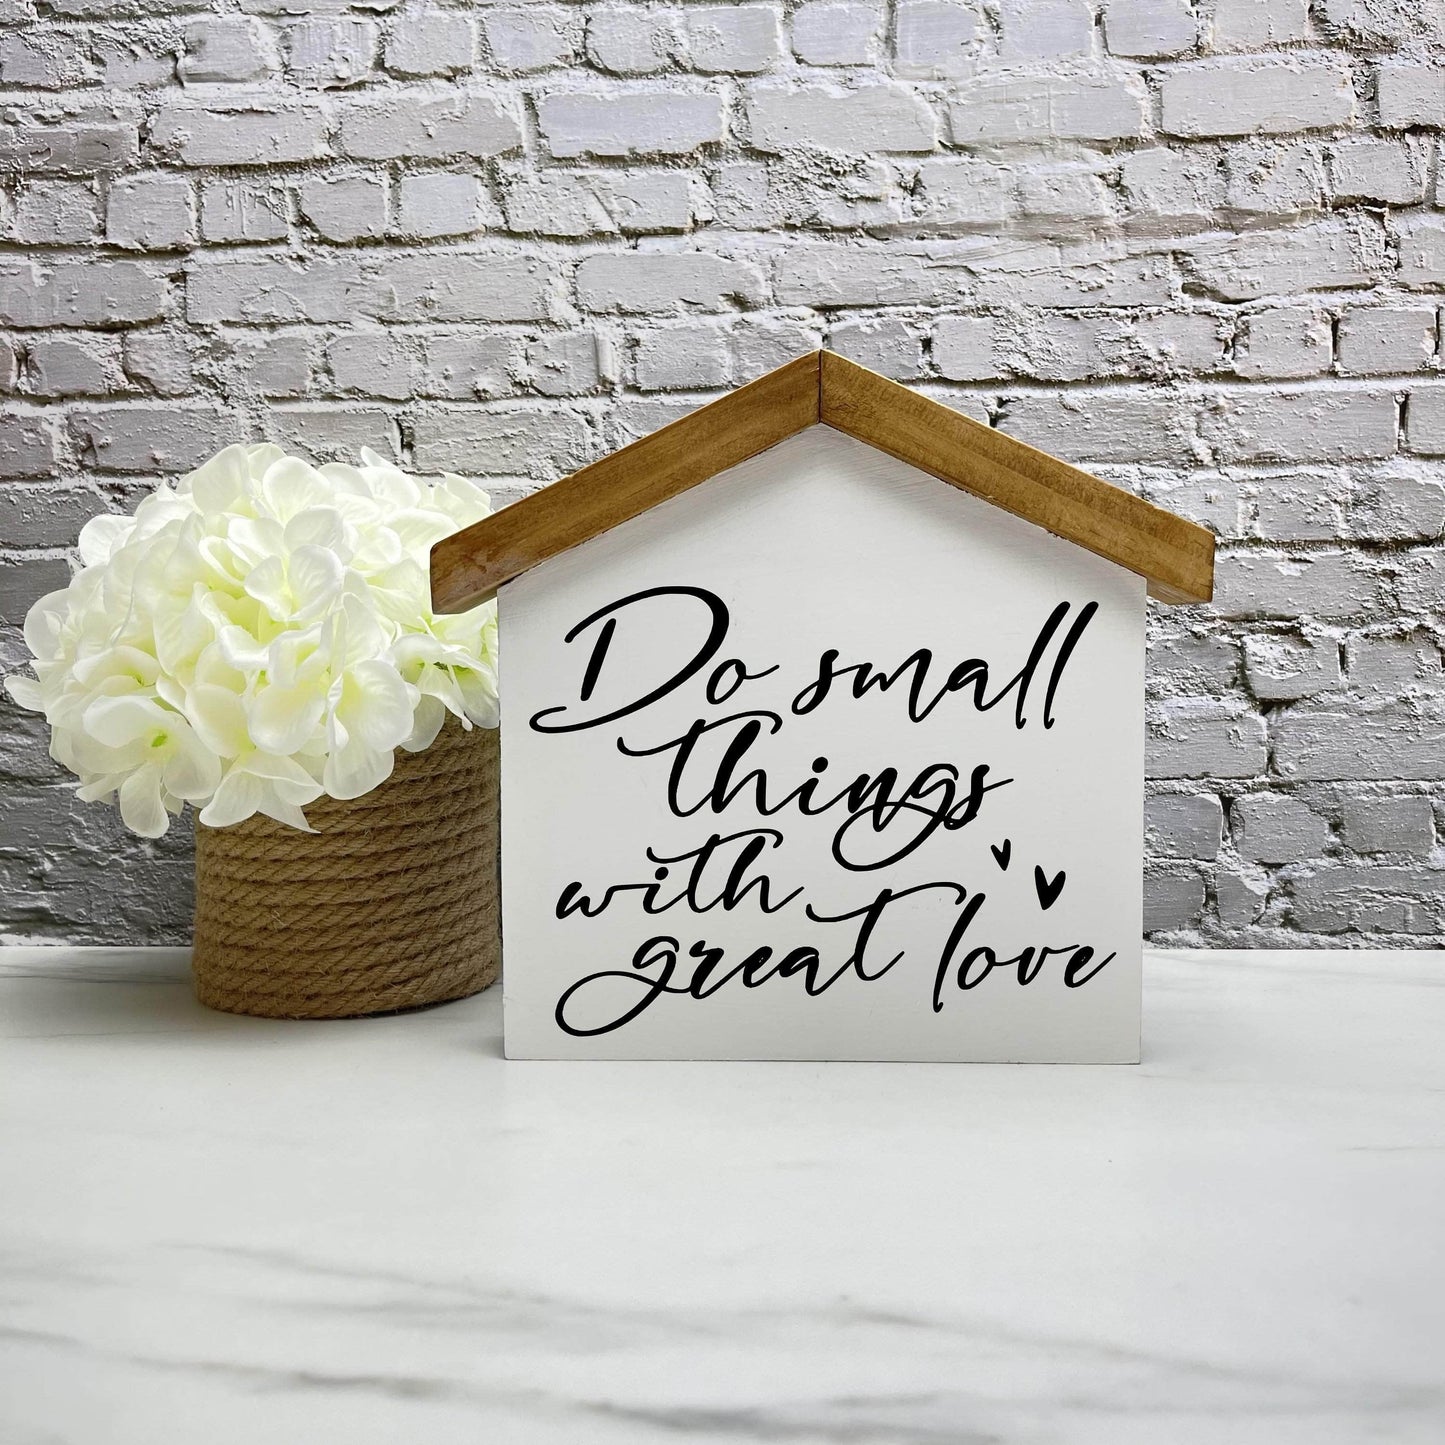 Do small things with great love House wood sign, farmhouse sign, rustic decor, home decor